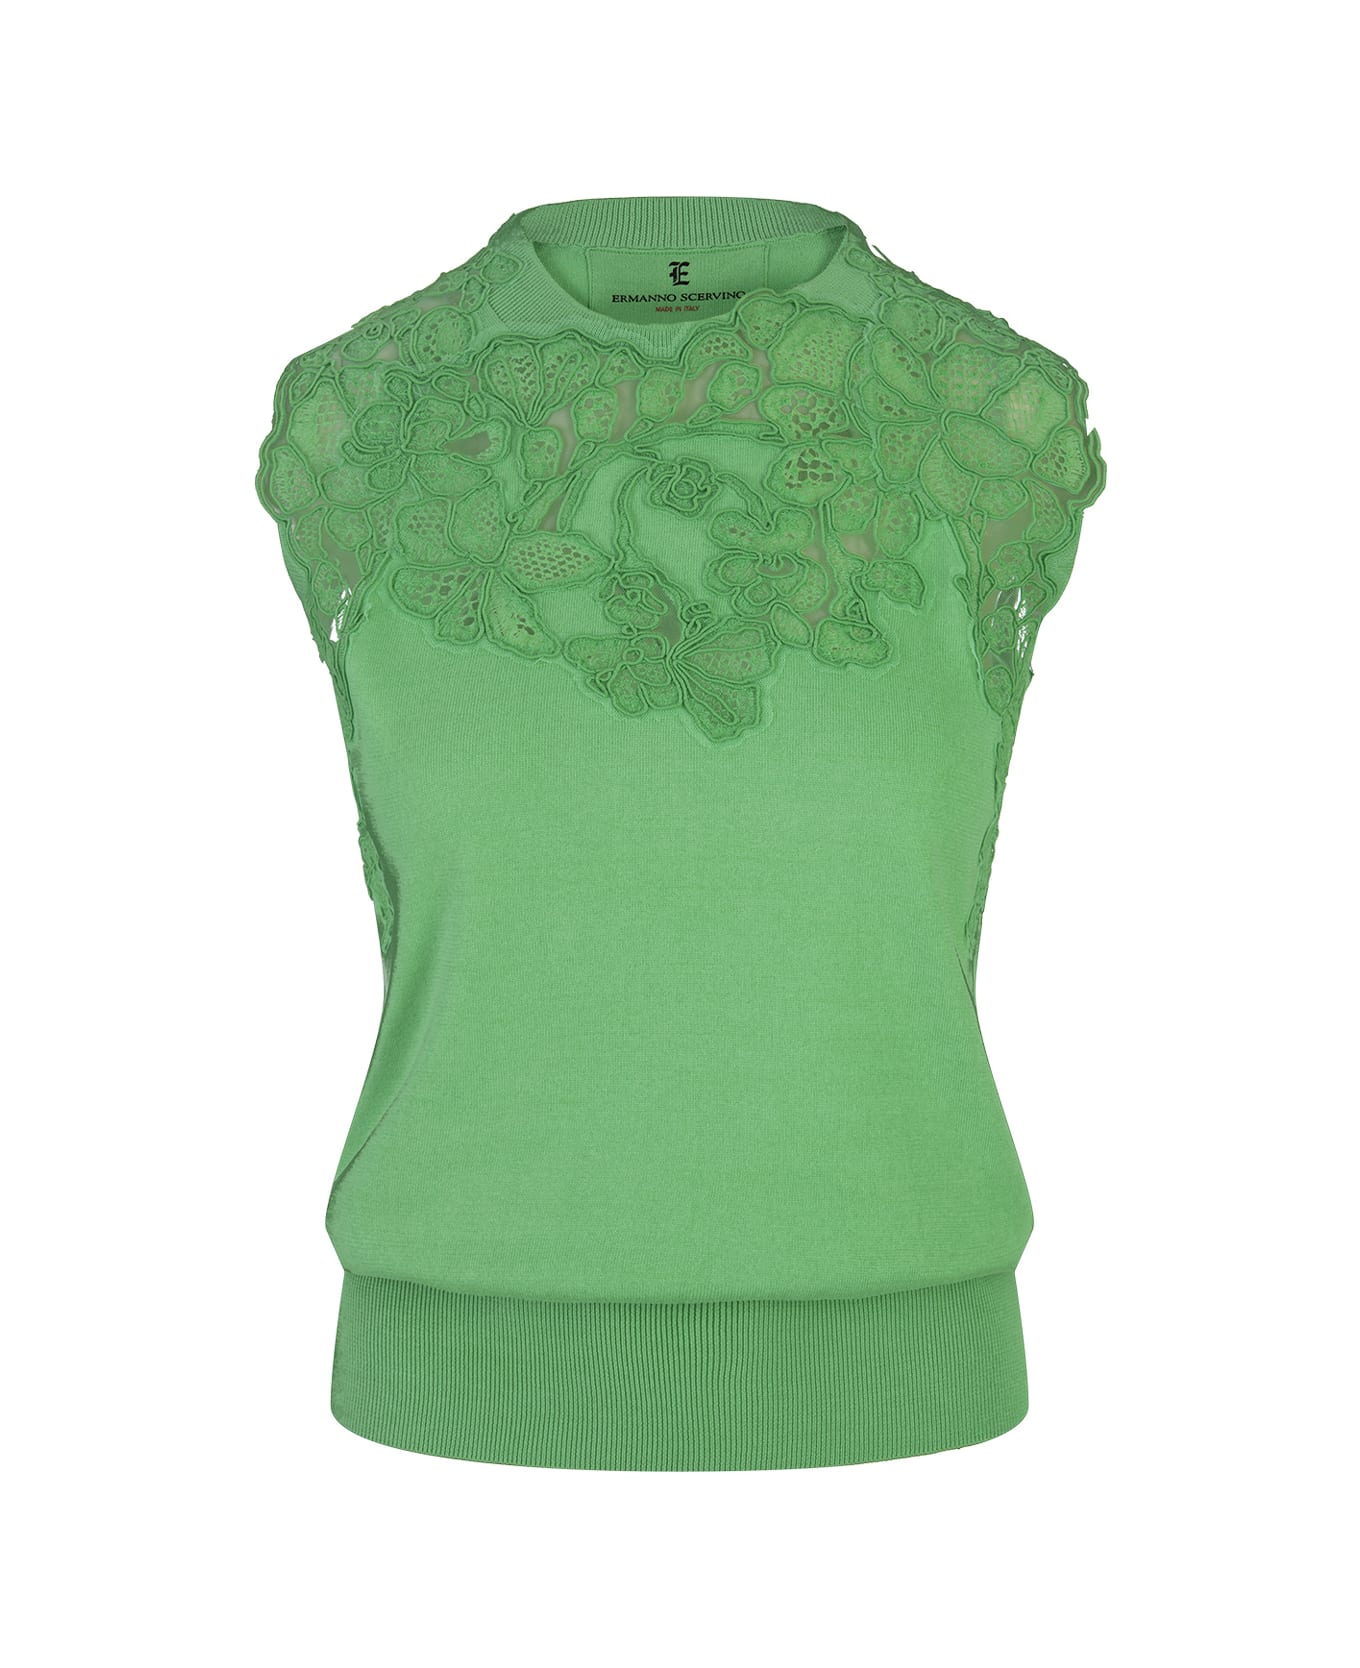 Ermanno Scervino Green Knitted Sleeveless Top With Lace - Green